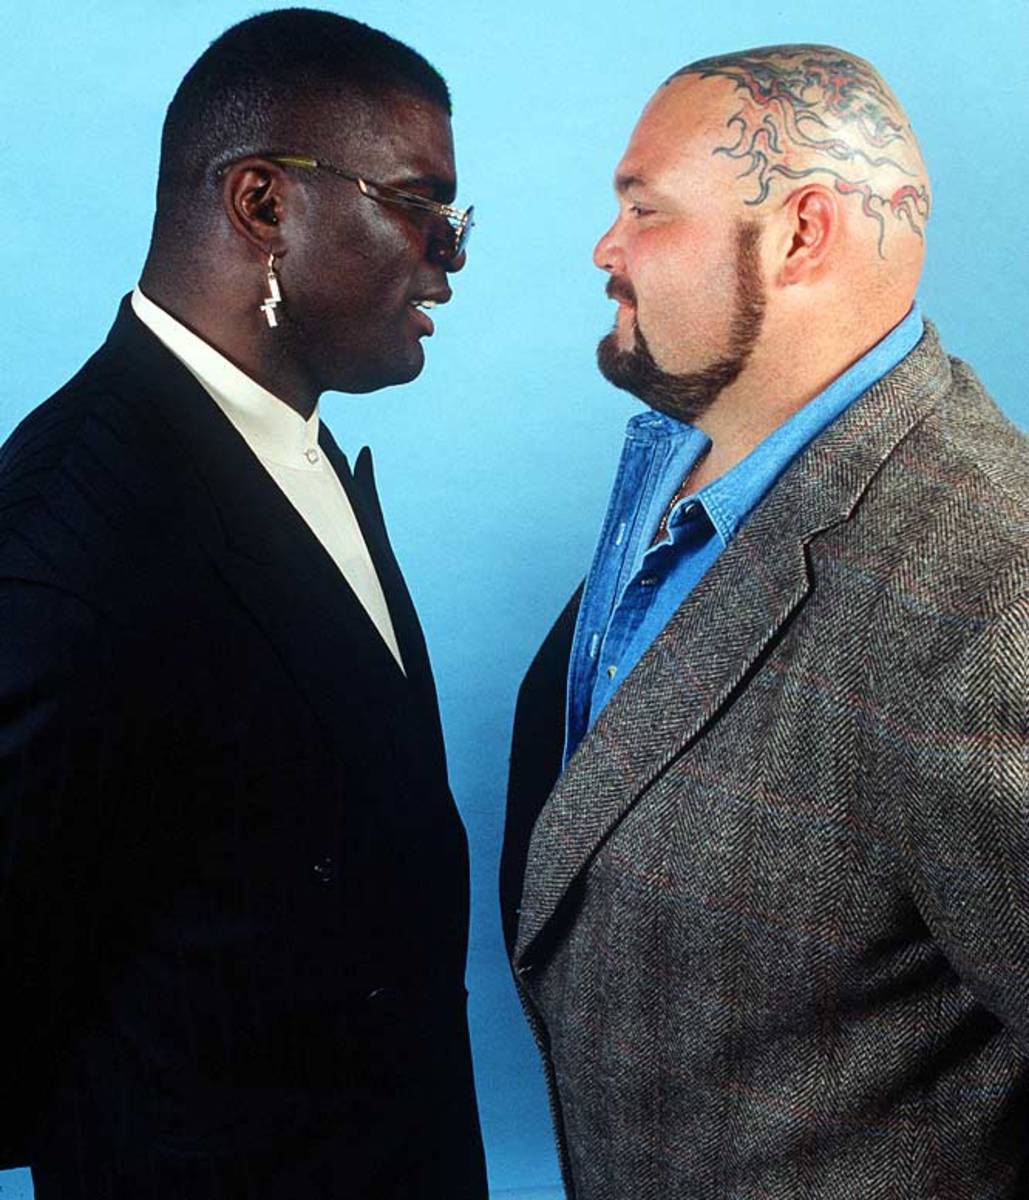 Lawrence Taylor and Bam Bam Bigelow